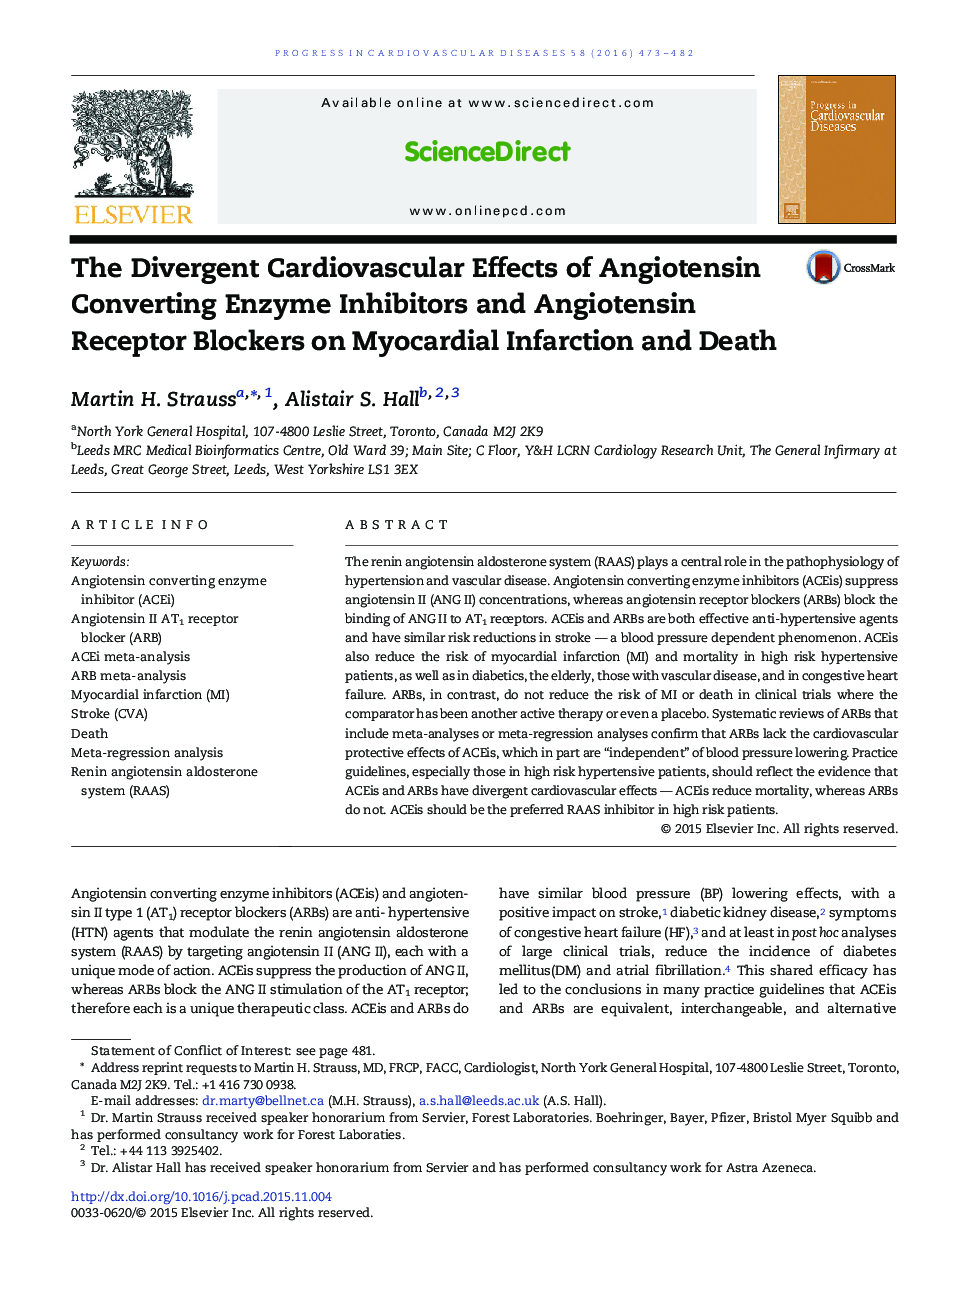 The Divergent Cardiovascular Effects of Angiotensin Converting Enzyme Inhibitors and Angiotensin Receptor Blockers on Myocardial Infarction and Death 